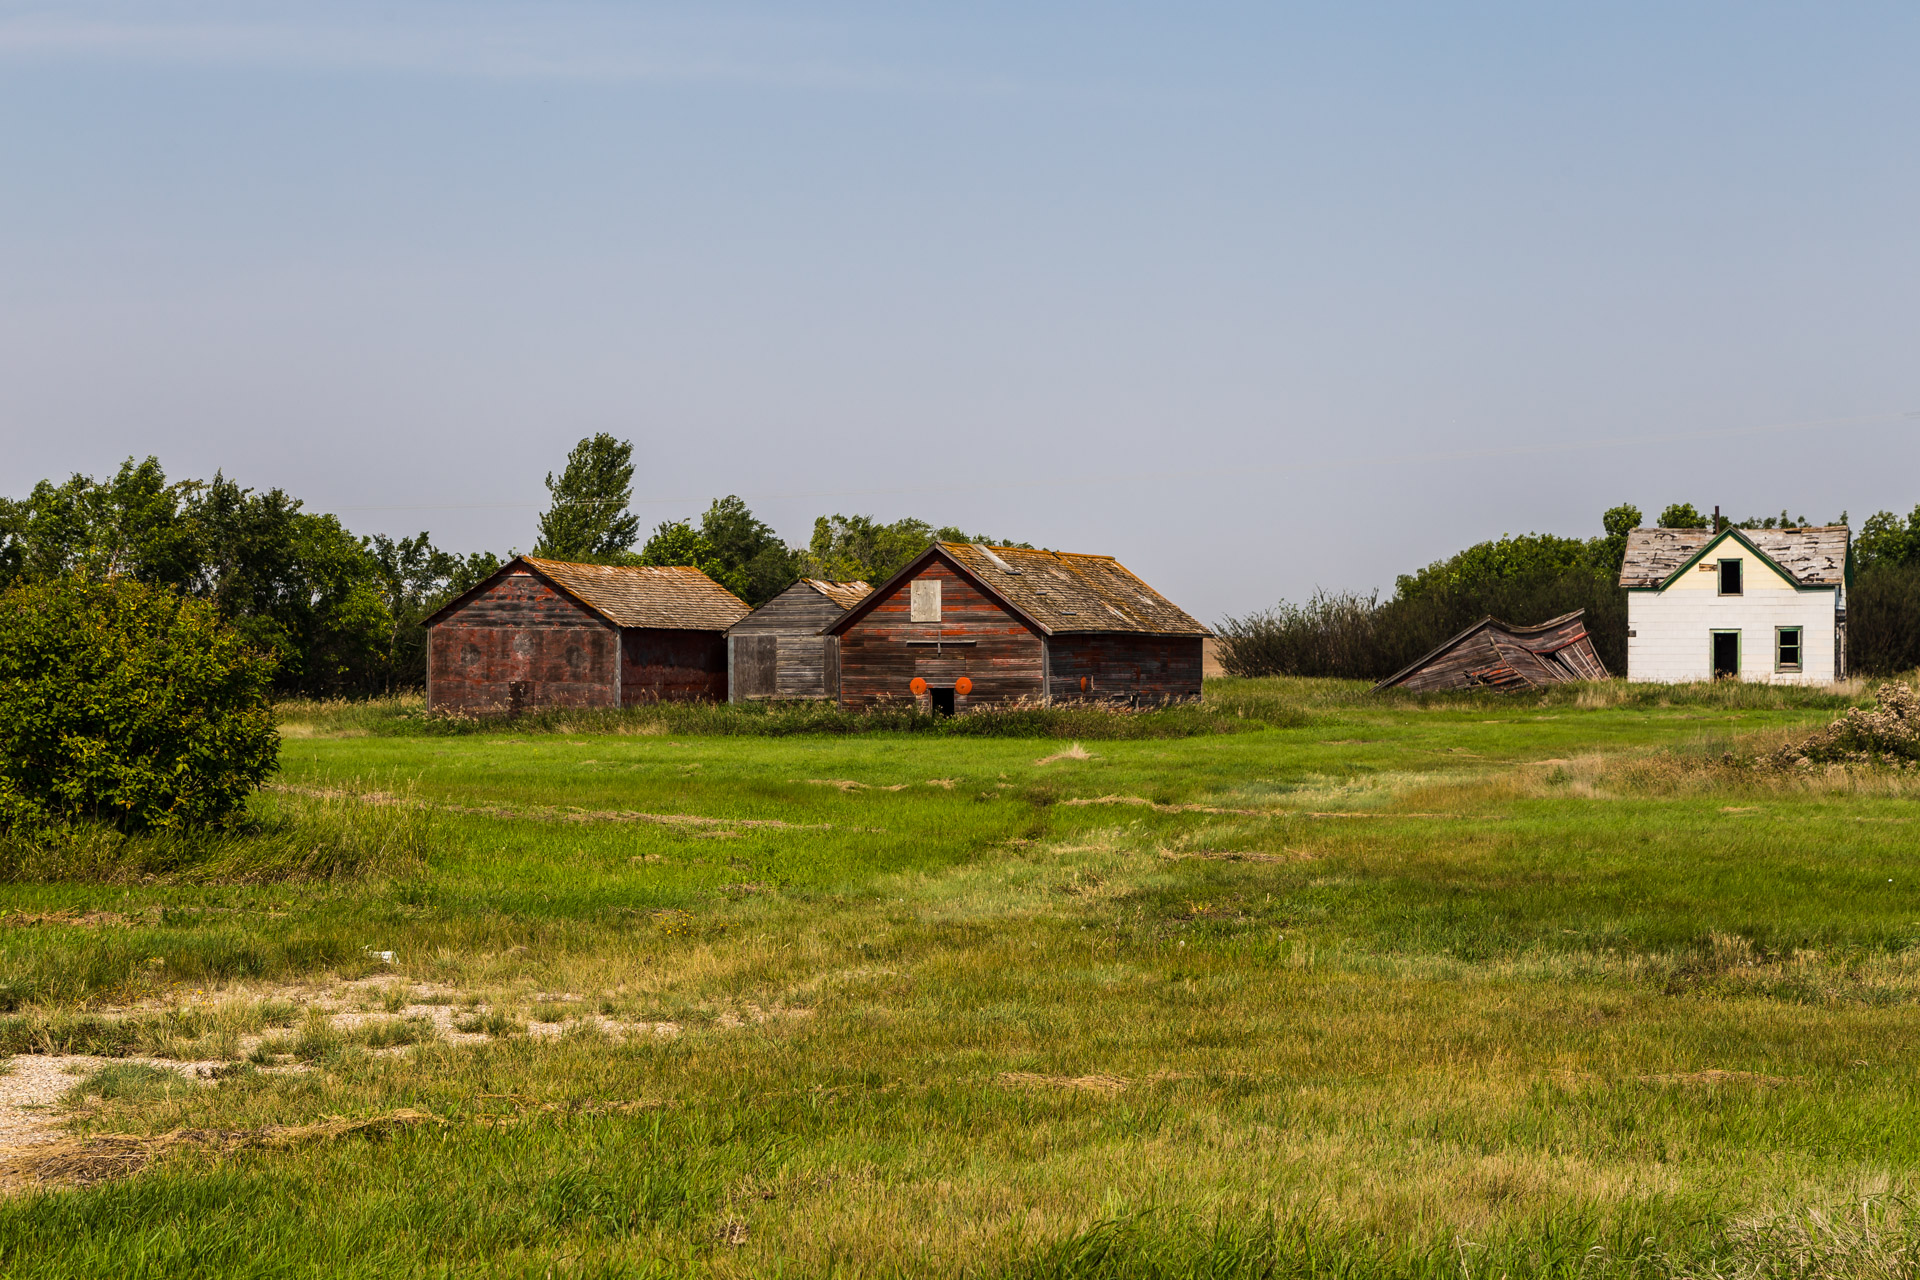 A Collection Of Barns (right angle mid)